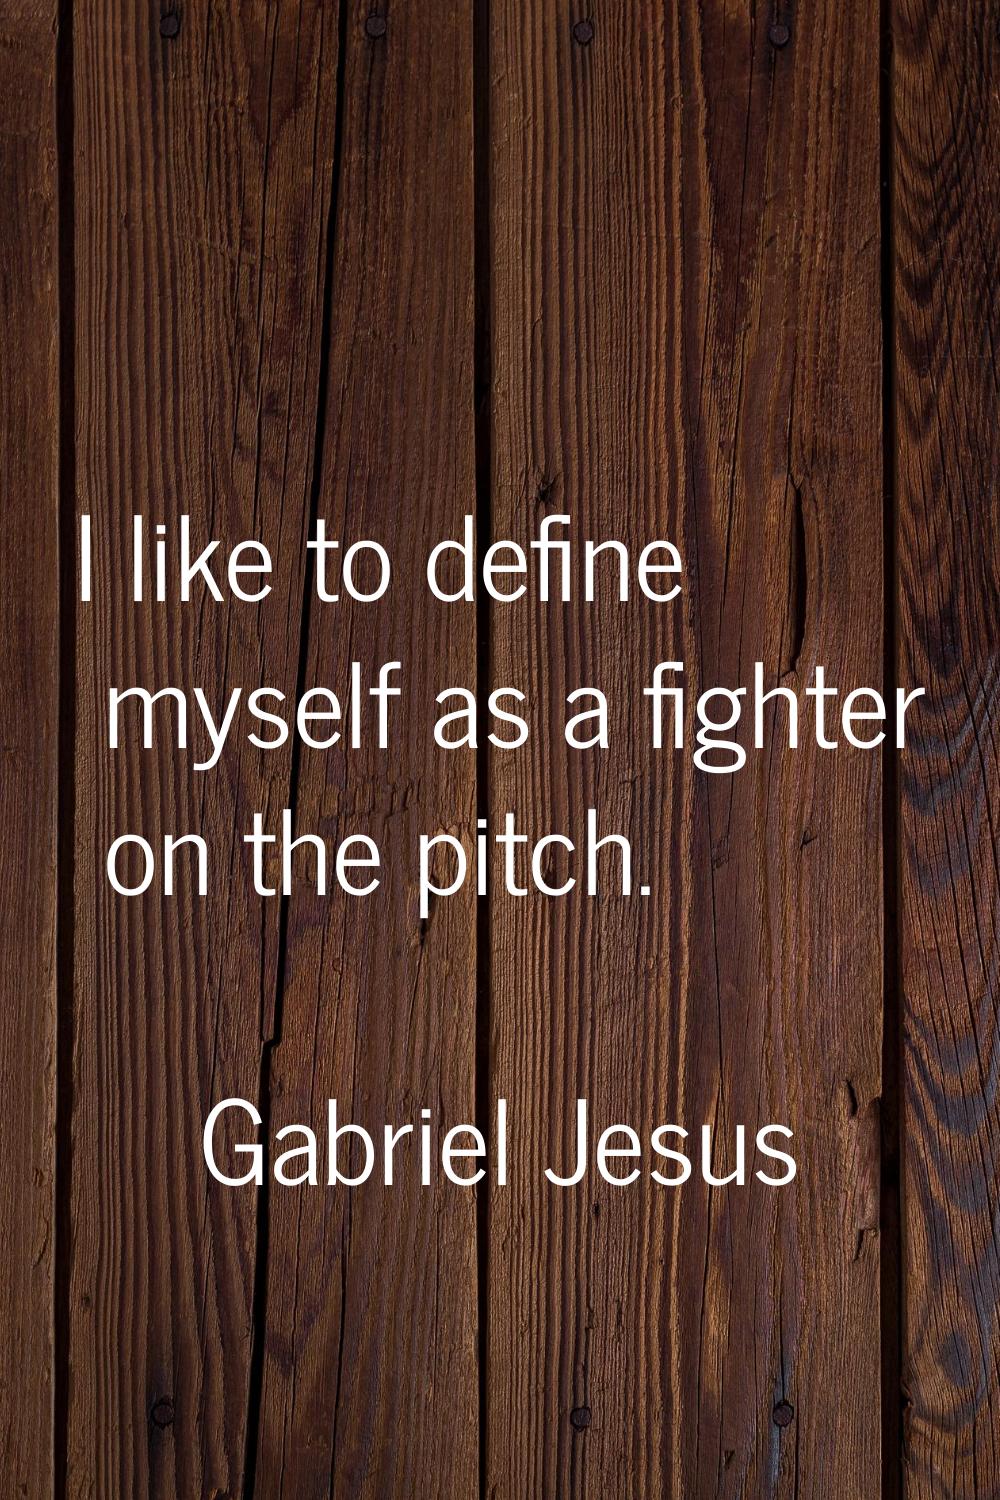 I like to define myself as a fighter on the pitch.